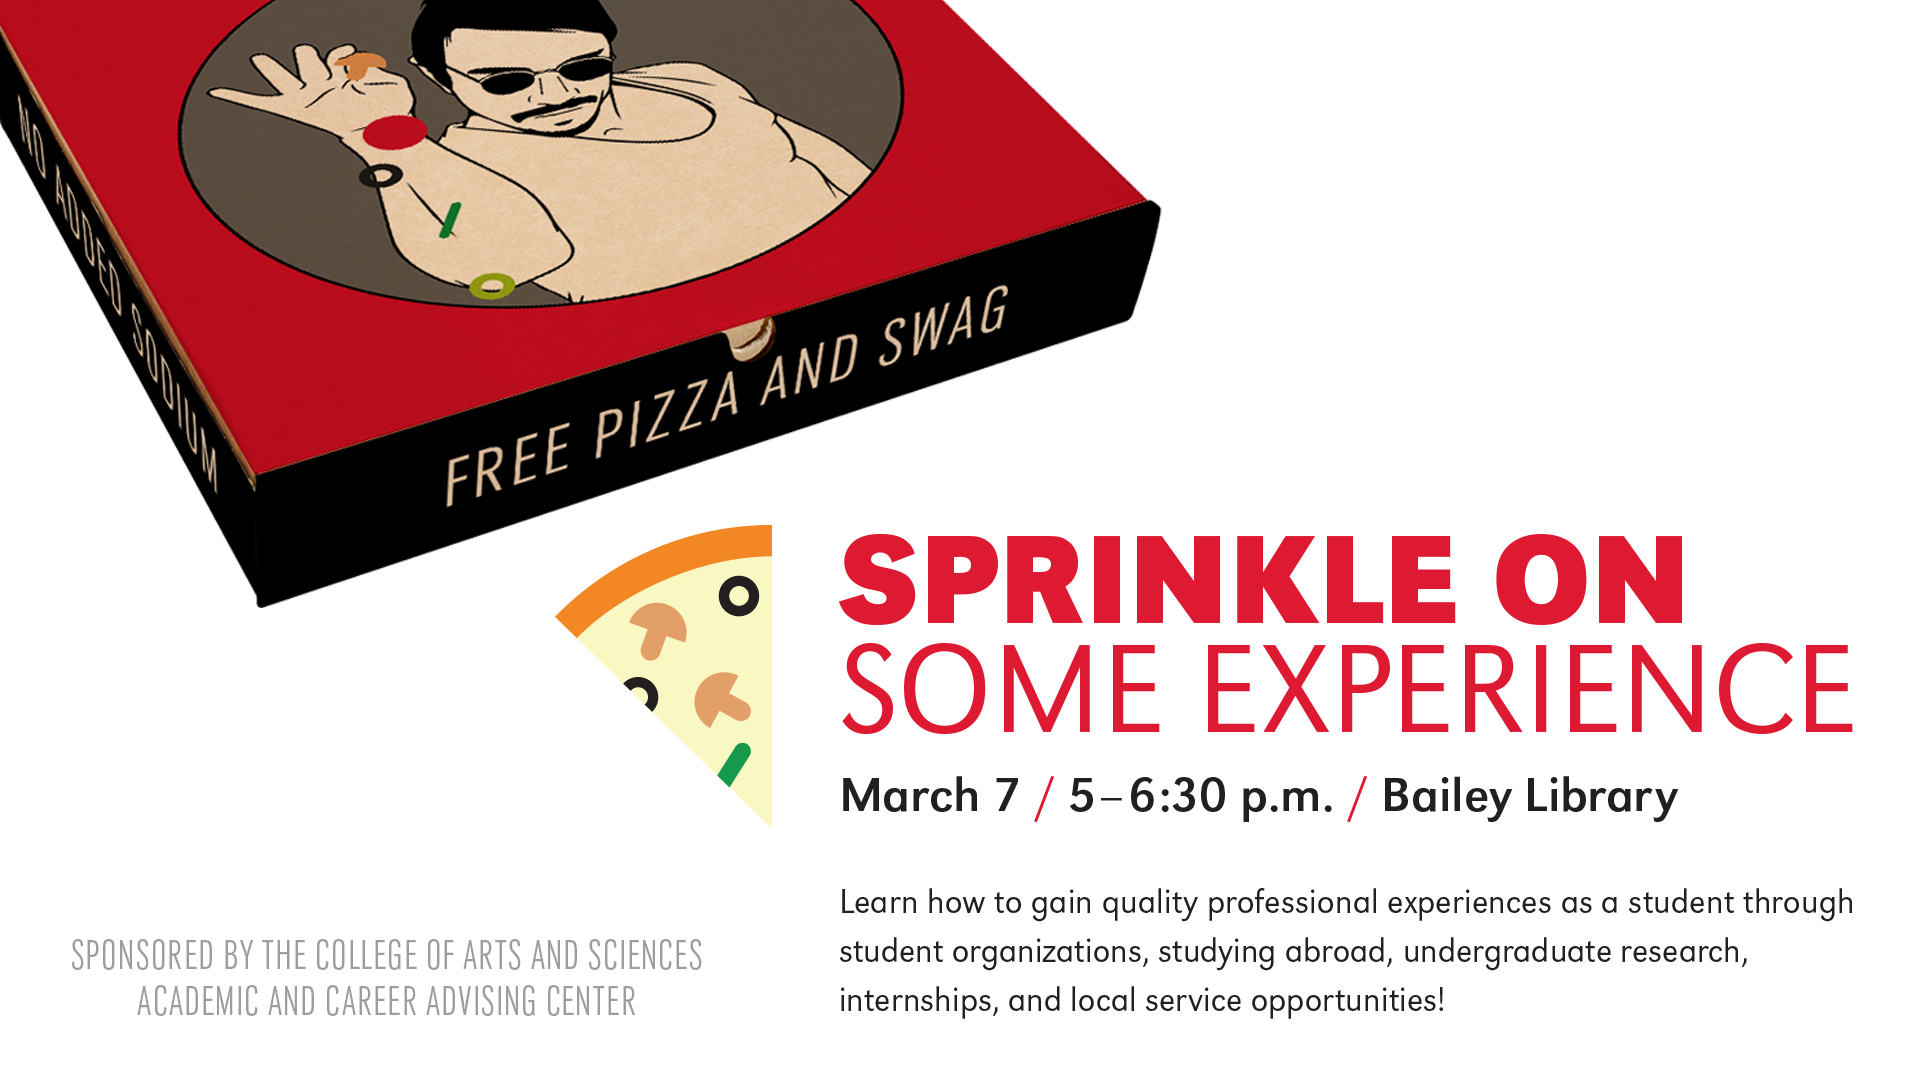 EVENT: Sprinkle on Some Experience